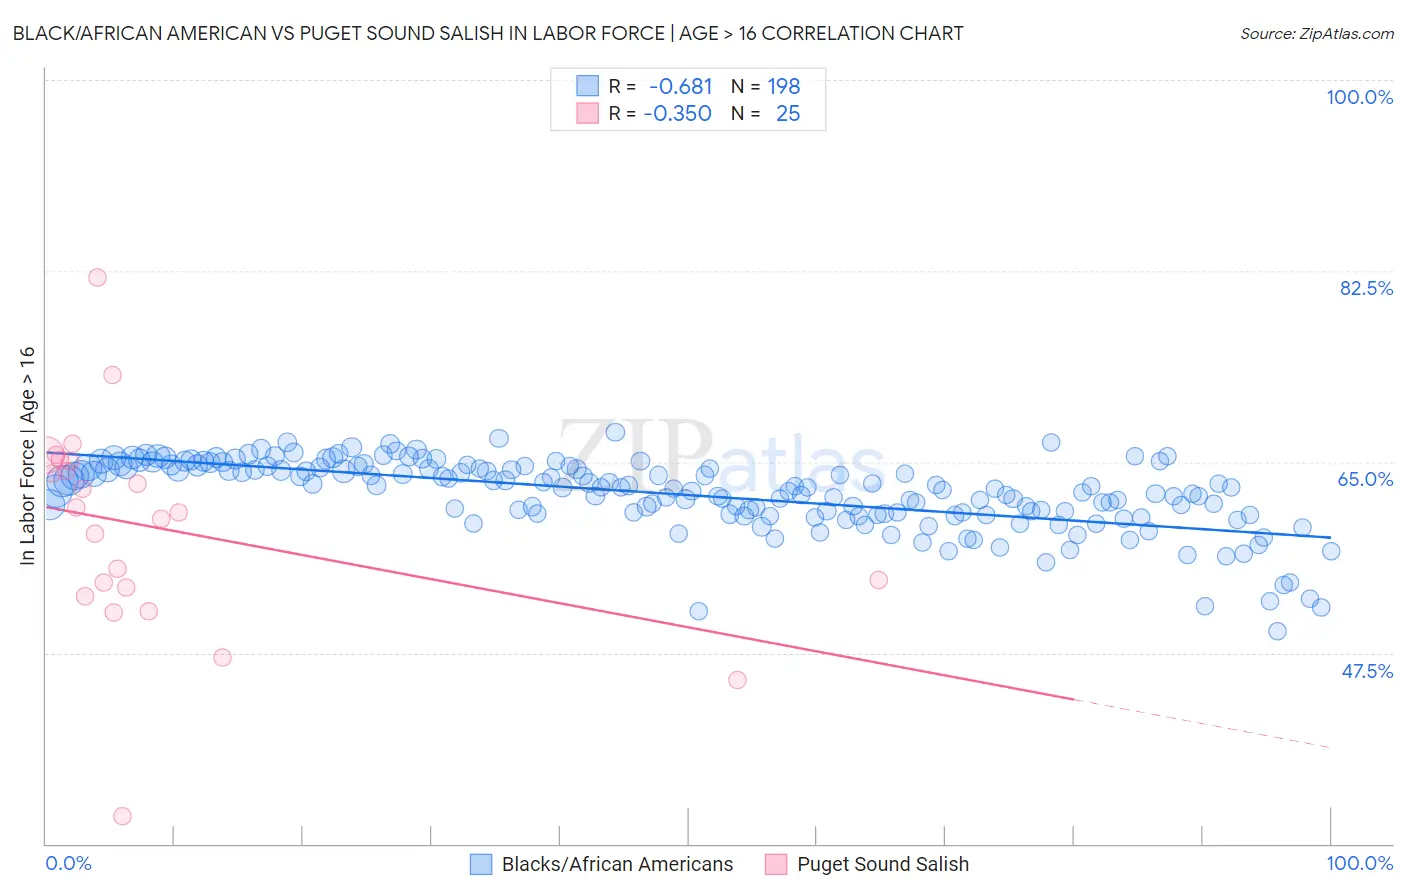 Black/African American vs Puget Sound Salish In Labor Force | Age > 16